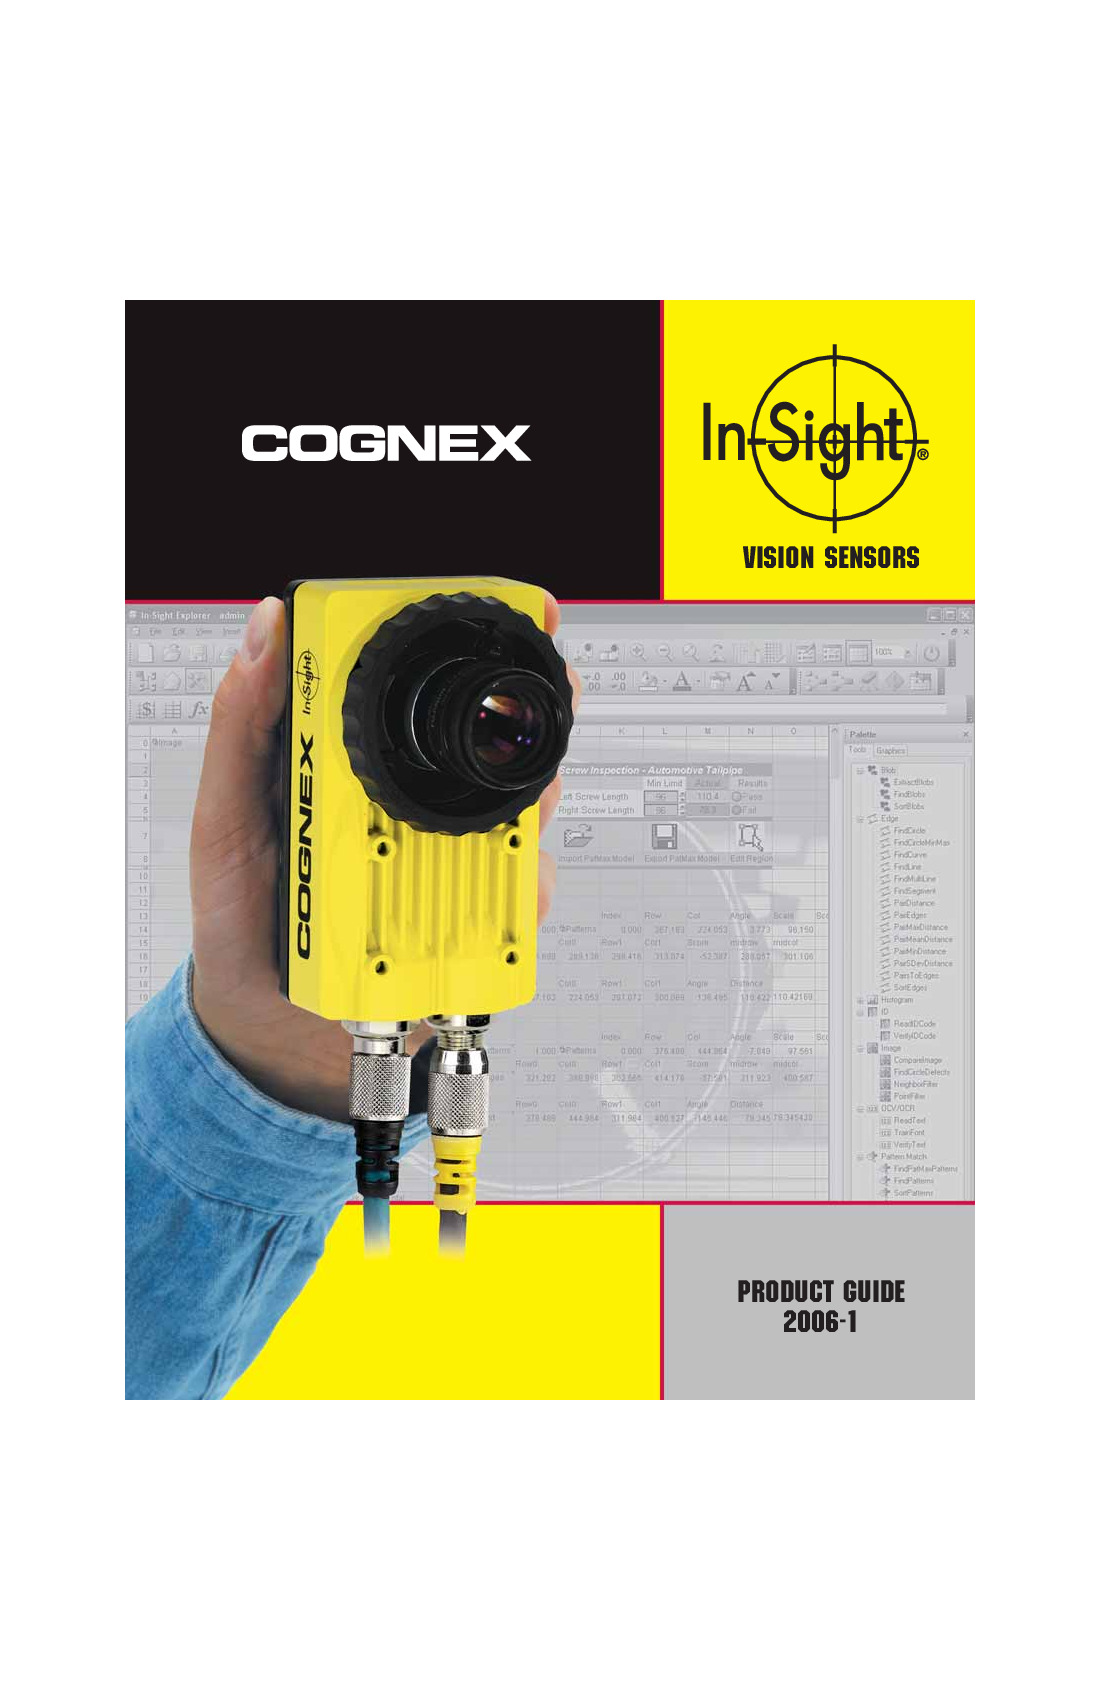 First Page Image of In-Sight-brochure 825-0221-1R.pdf